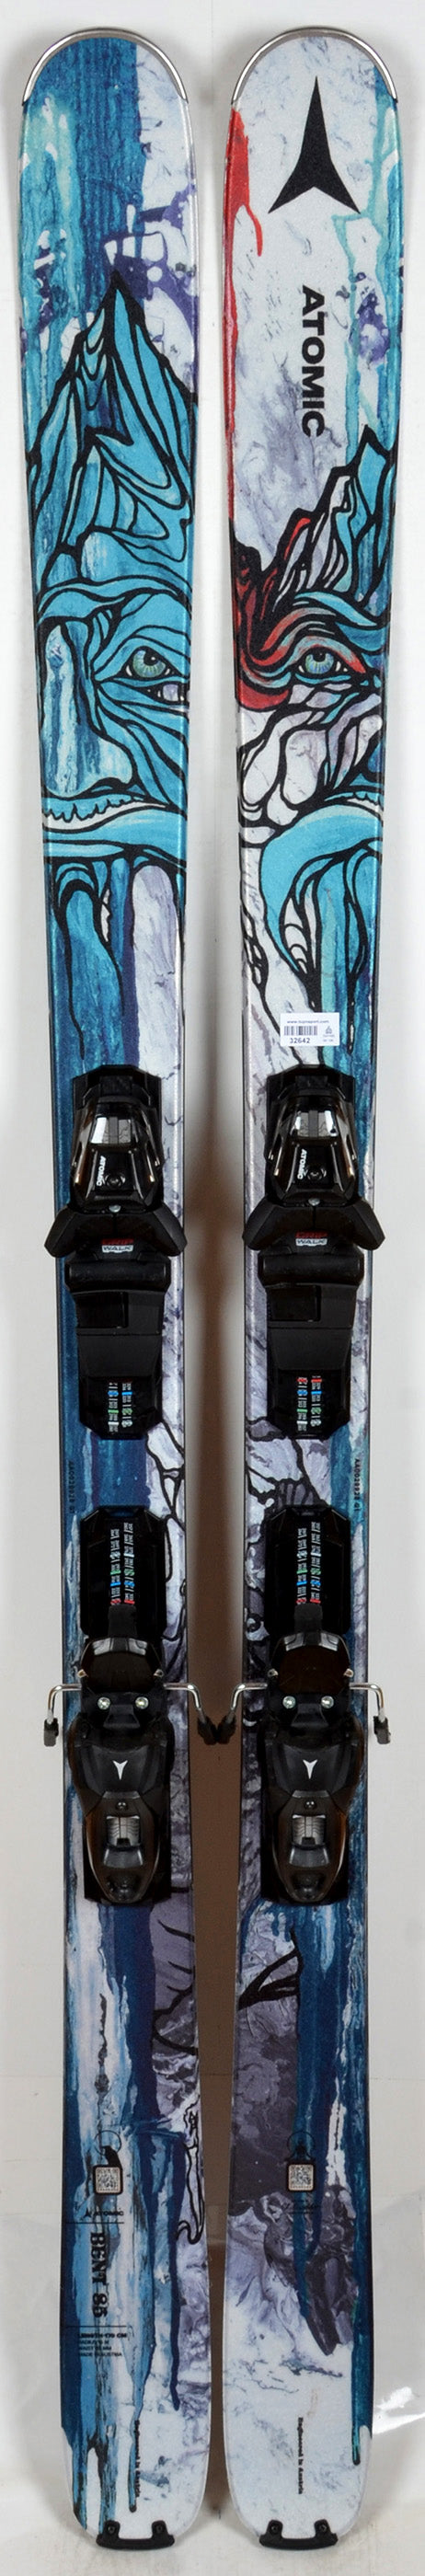 Atomic BENT 85 + fixations M10 GW - TEST 2024 - skis d'occasion